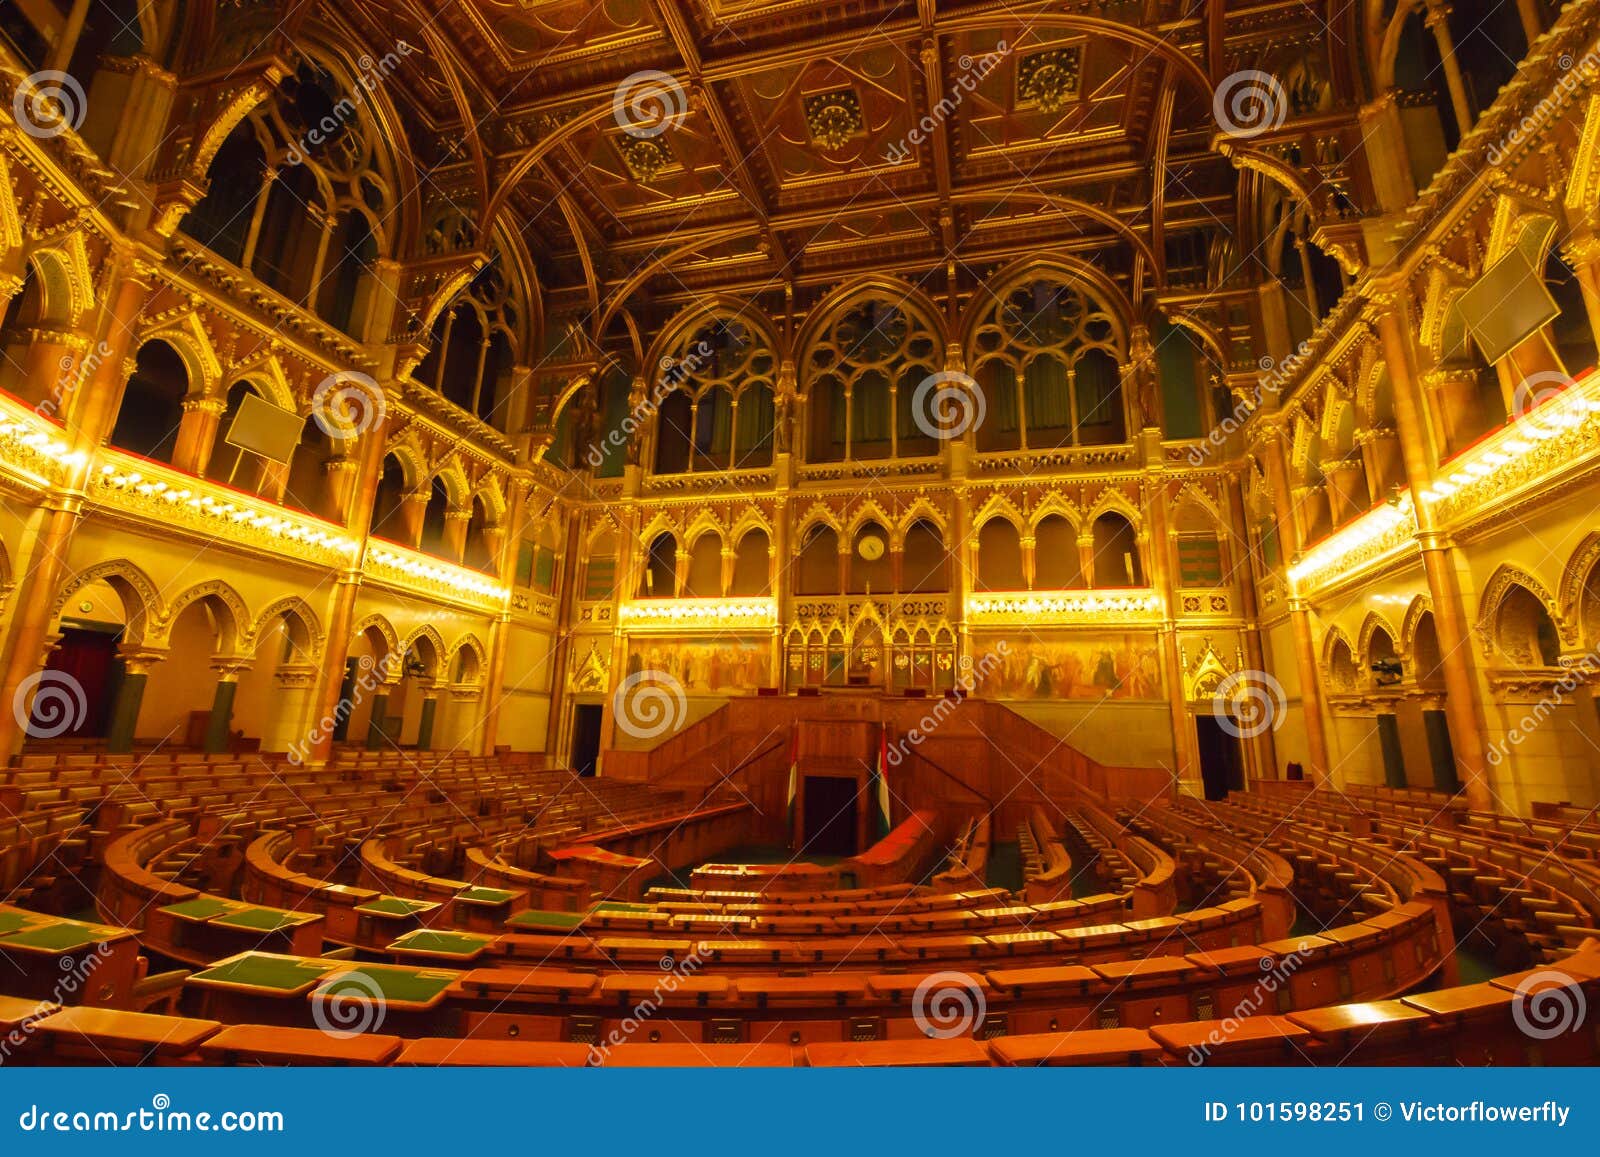 Exploring the Budapest Parliament Interior: The Assembly Hall